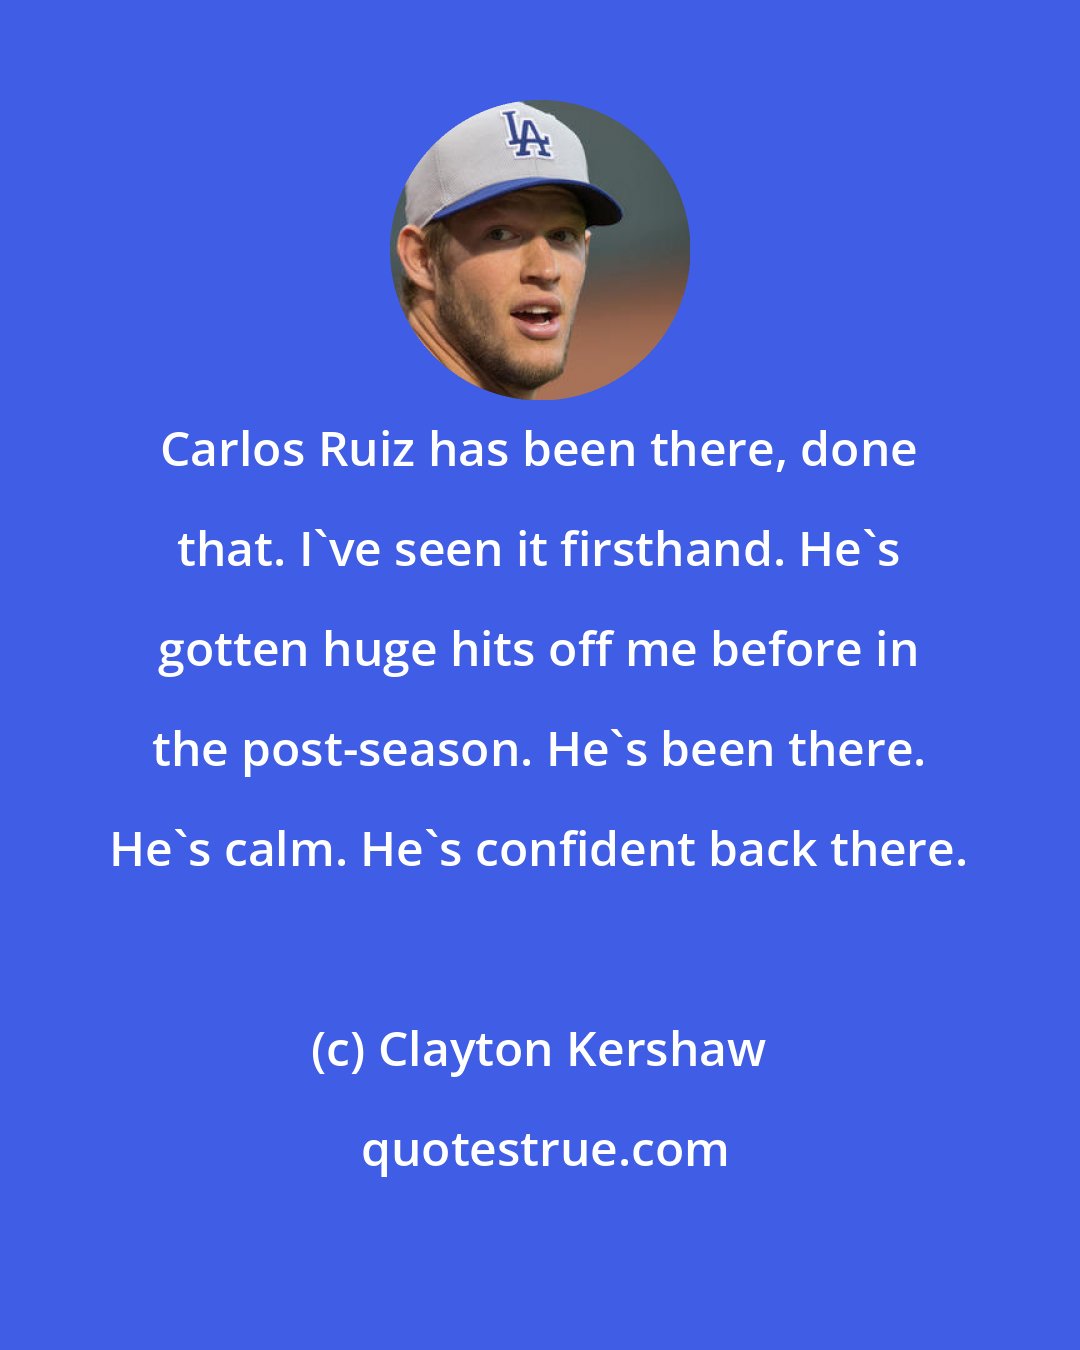 Clayton Kershaw: Carlos Ruiz has been there, done that. I've seen it firsthand. He's gotten huge hits off me before in the post-season. He's been there. He's calm. He's confident back there.